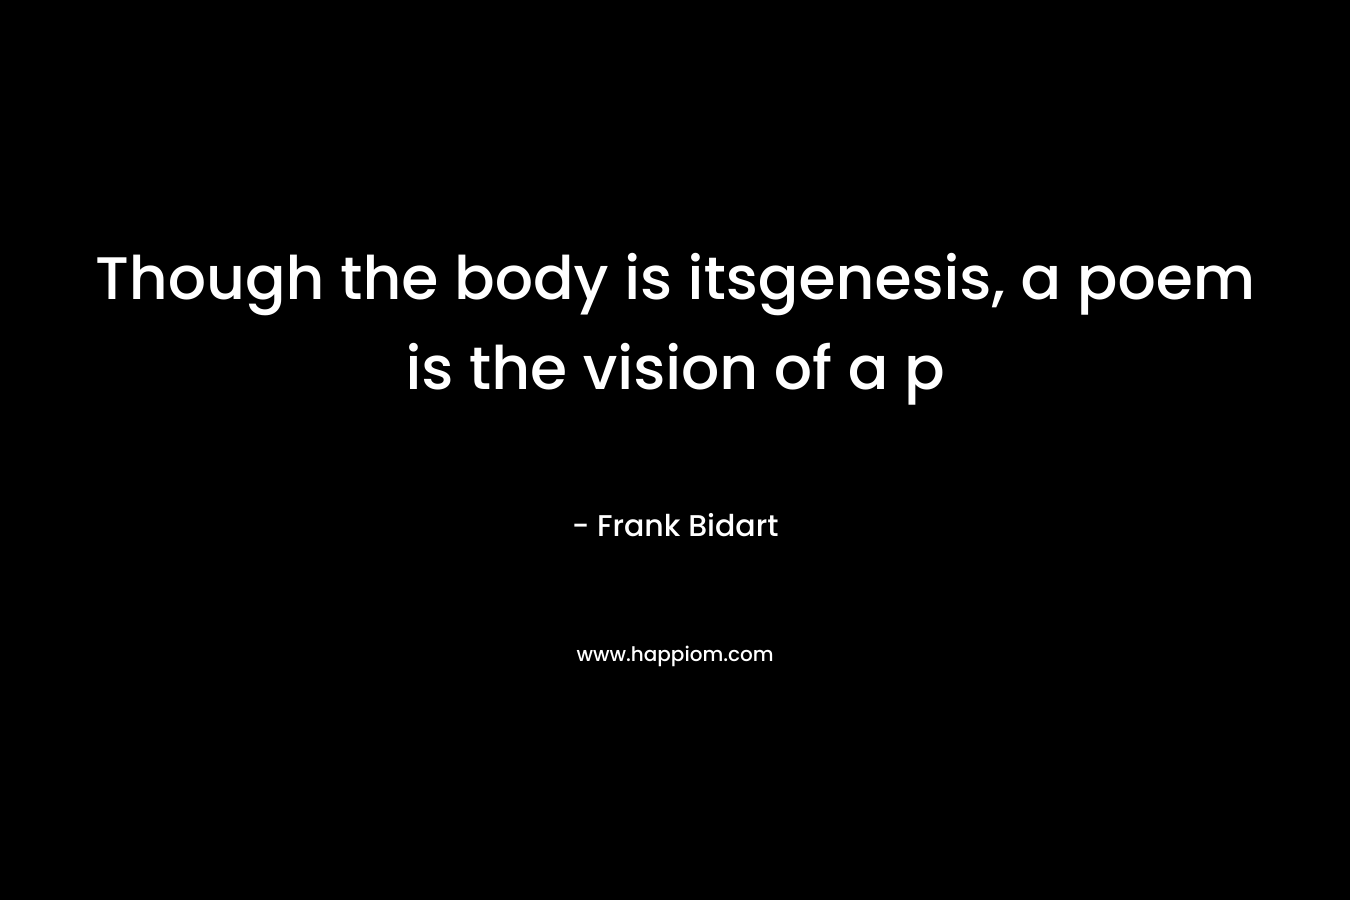 Though the body is itsgenesis, a poem is the vision of a p